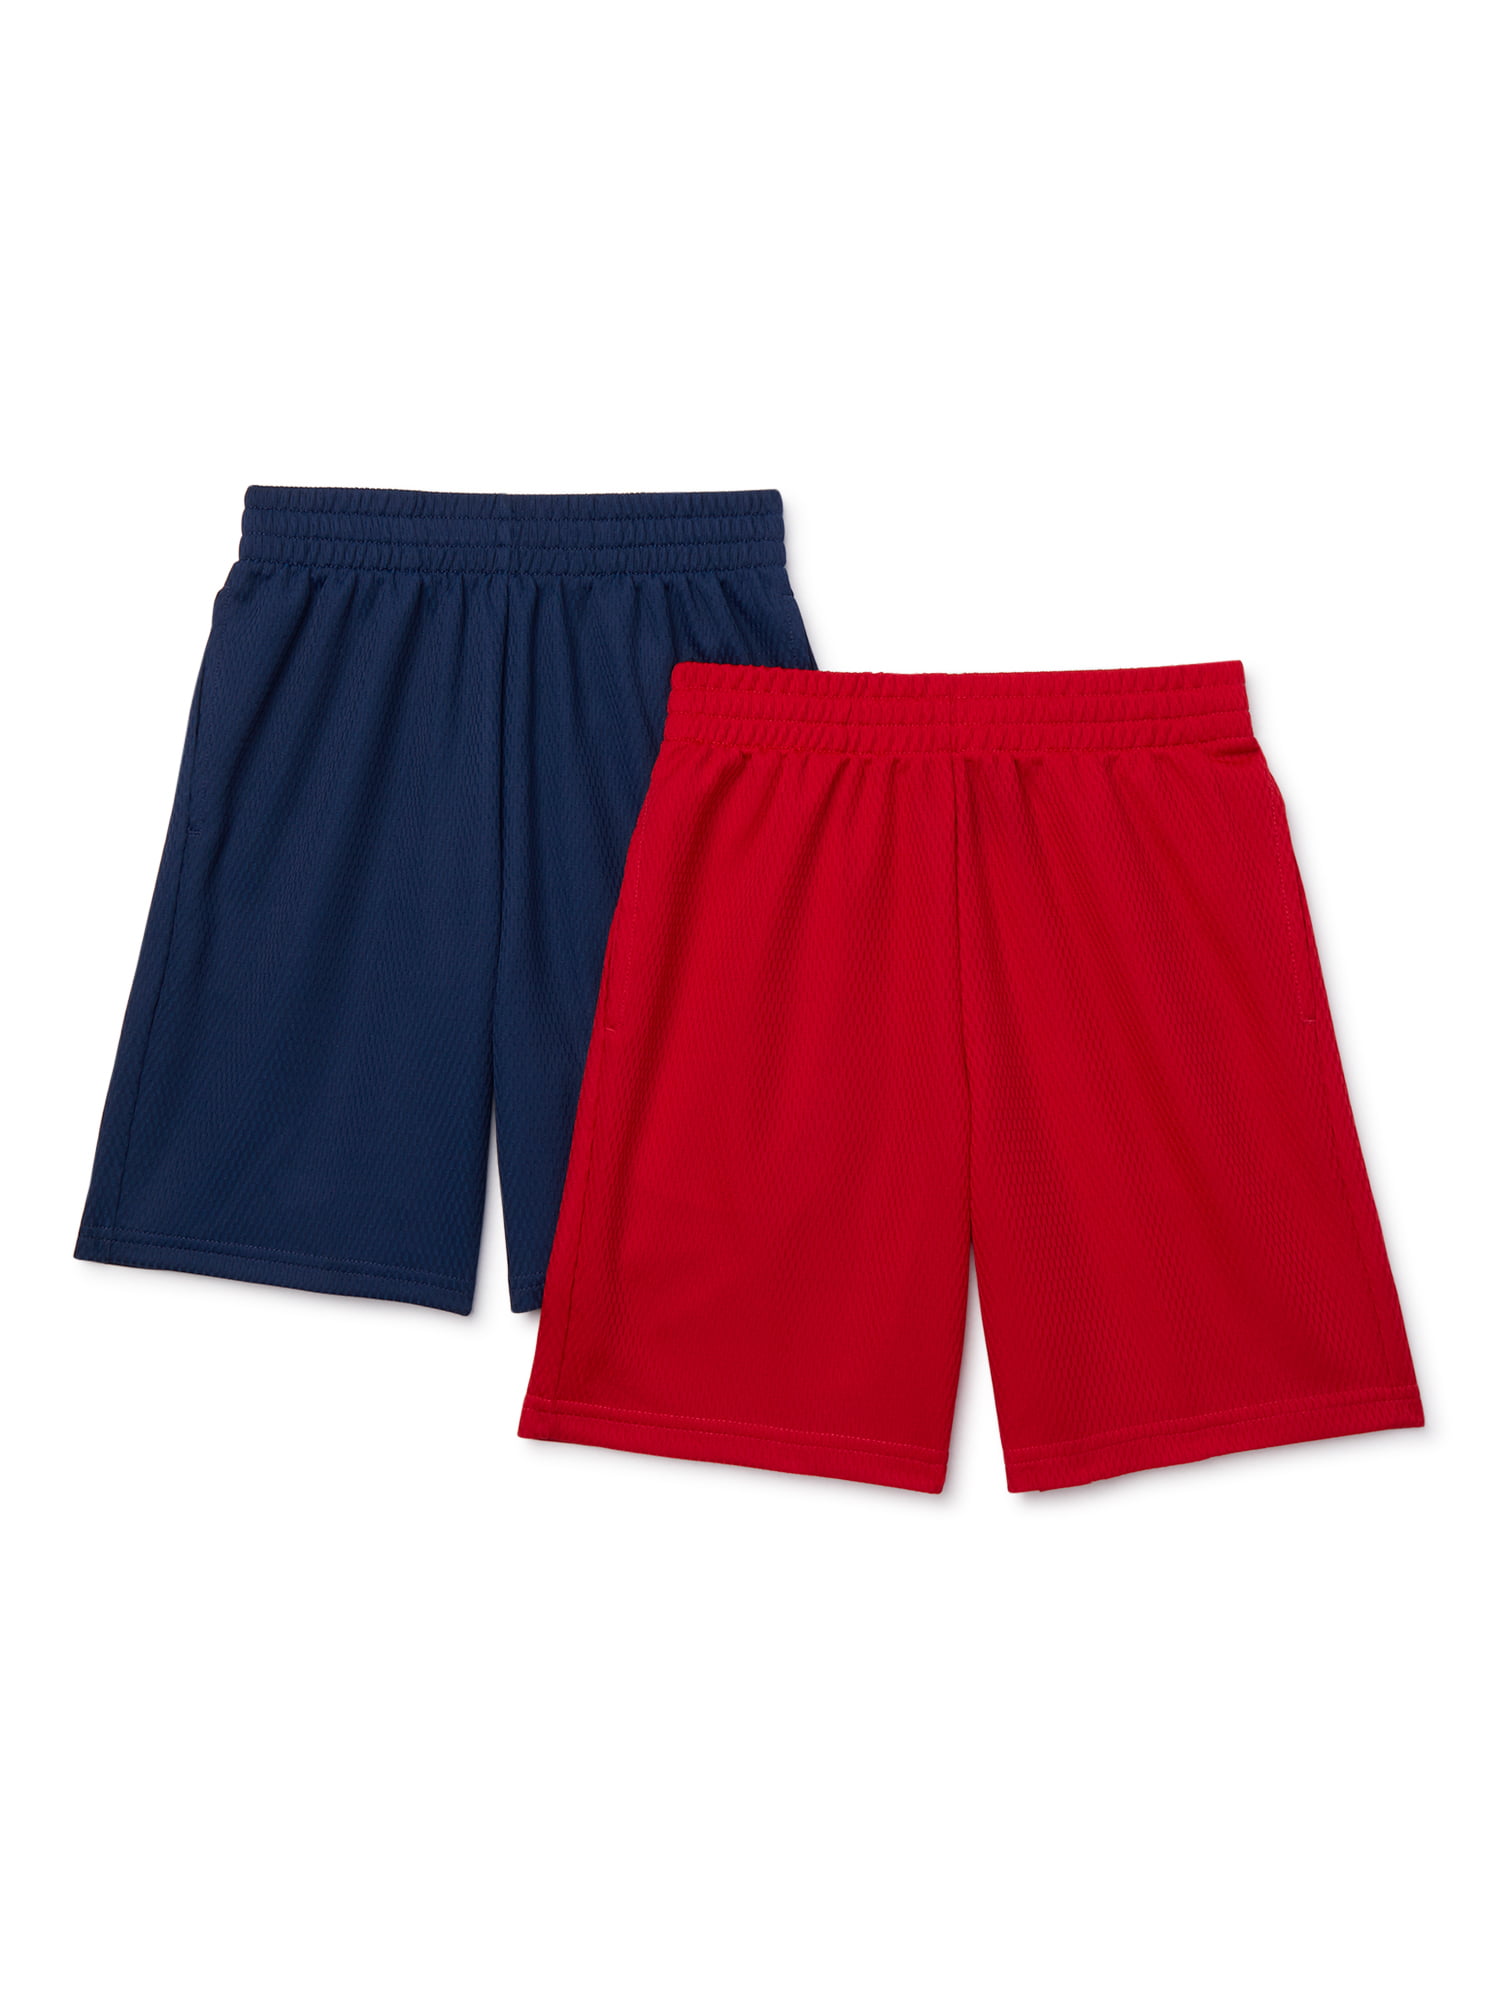 Details about   RBX boys Active swim surf trunks red color sz large 12/14 $40 price tag NWT 